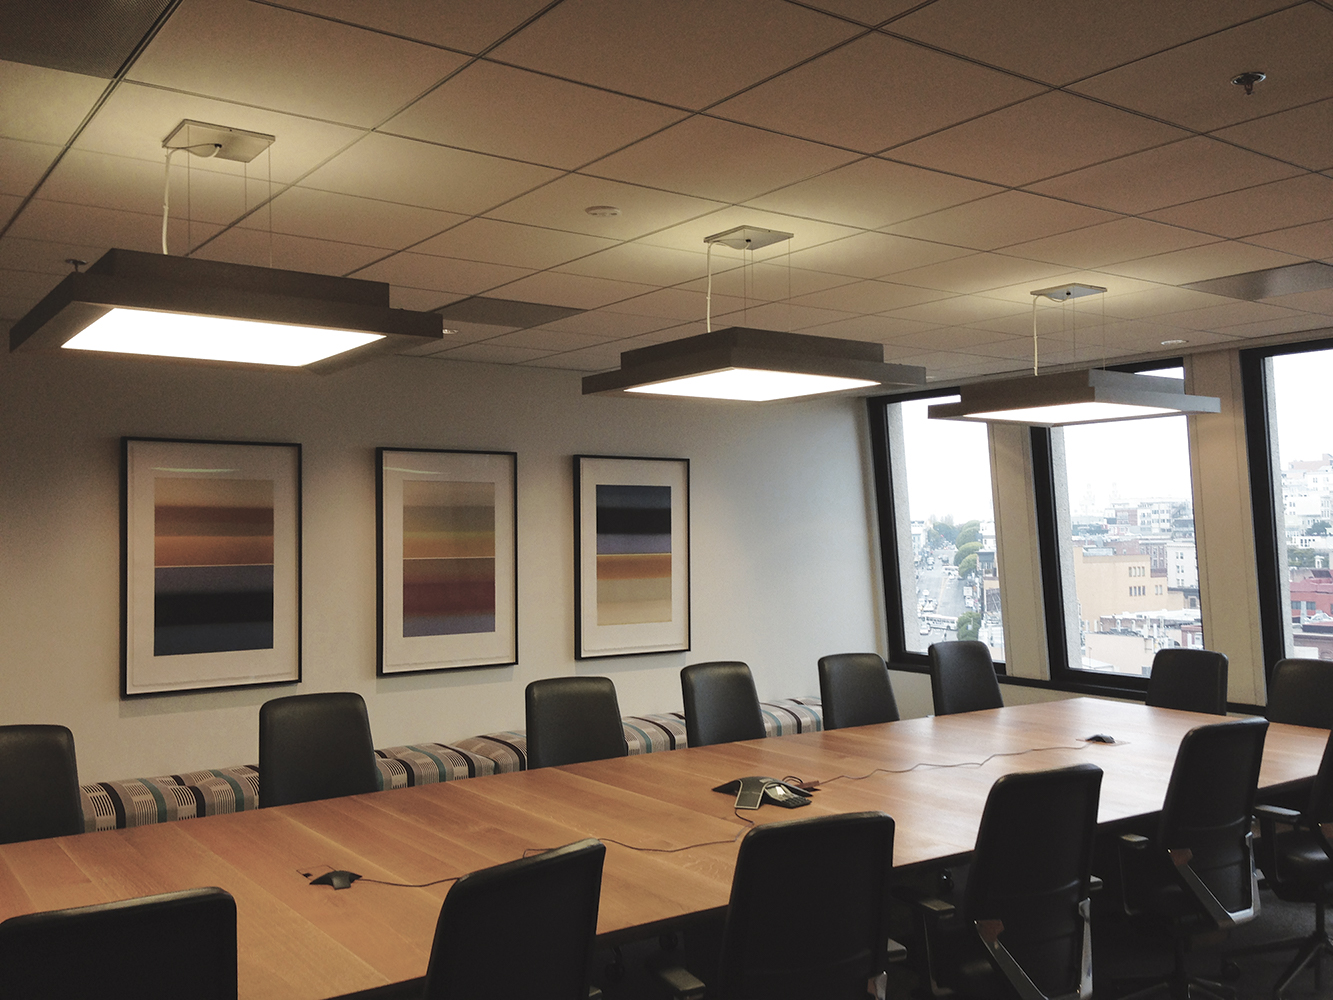 Fifth Avenue office lighting fixtures above a metropolitan workplace conference table